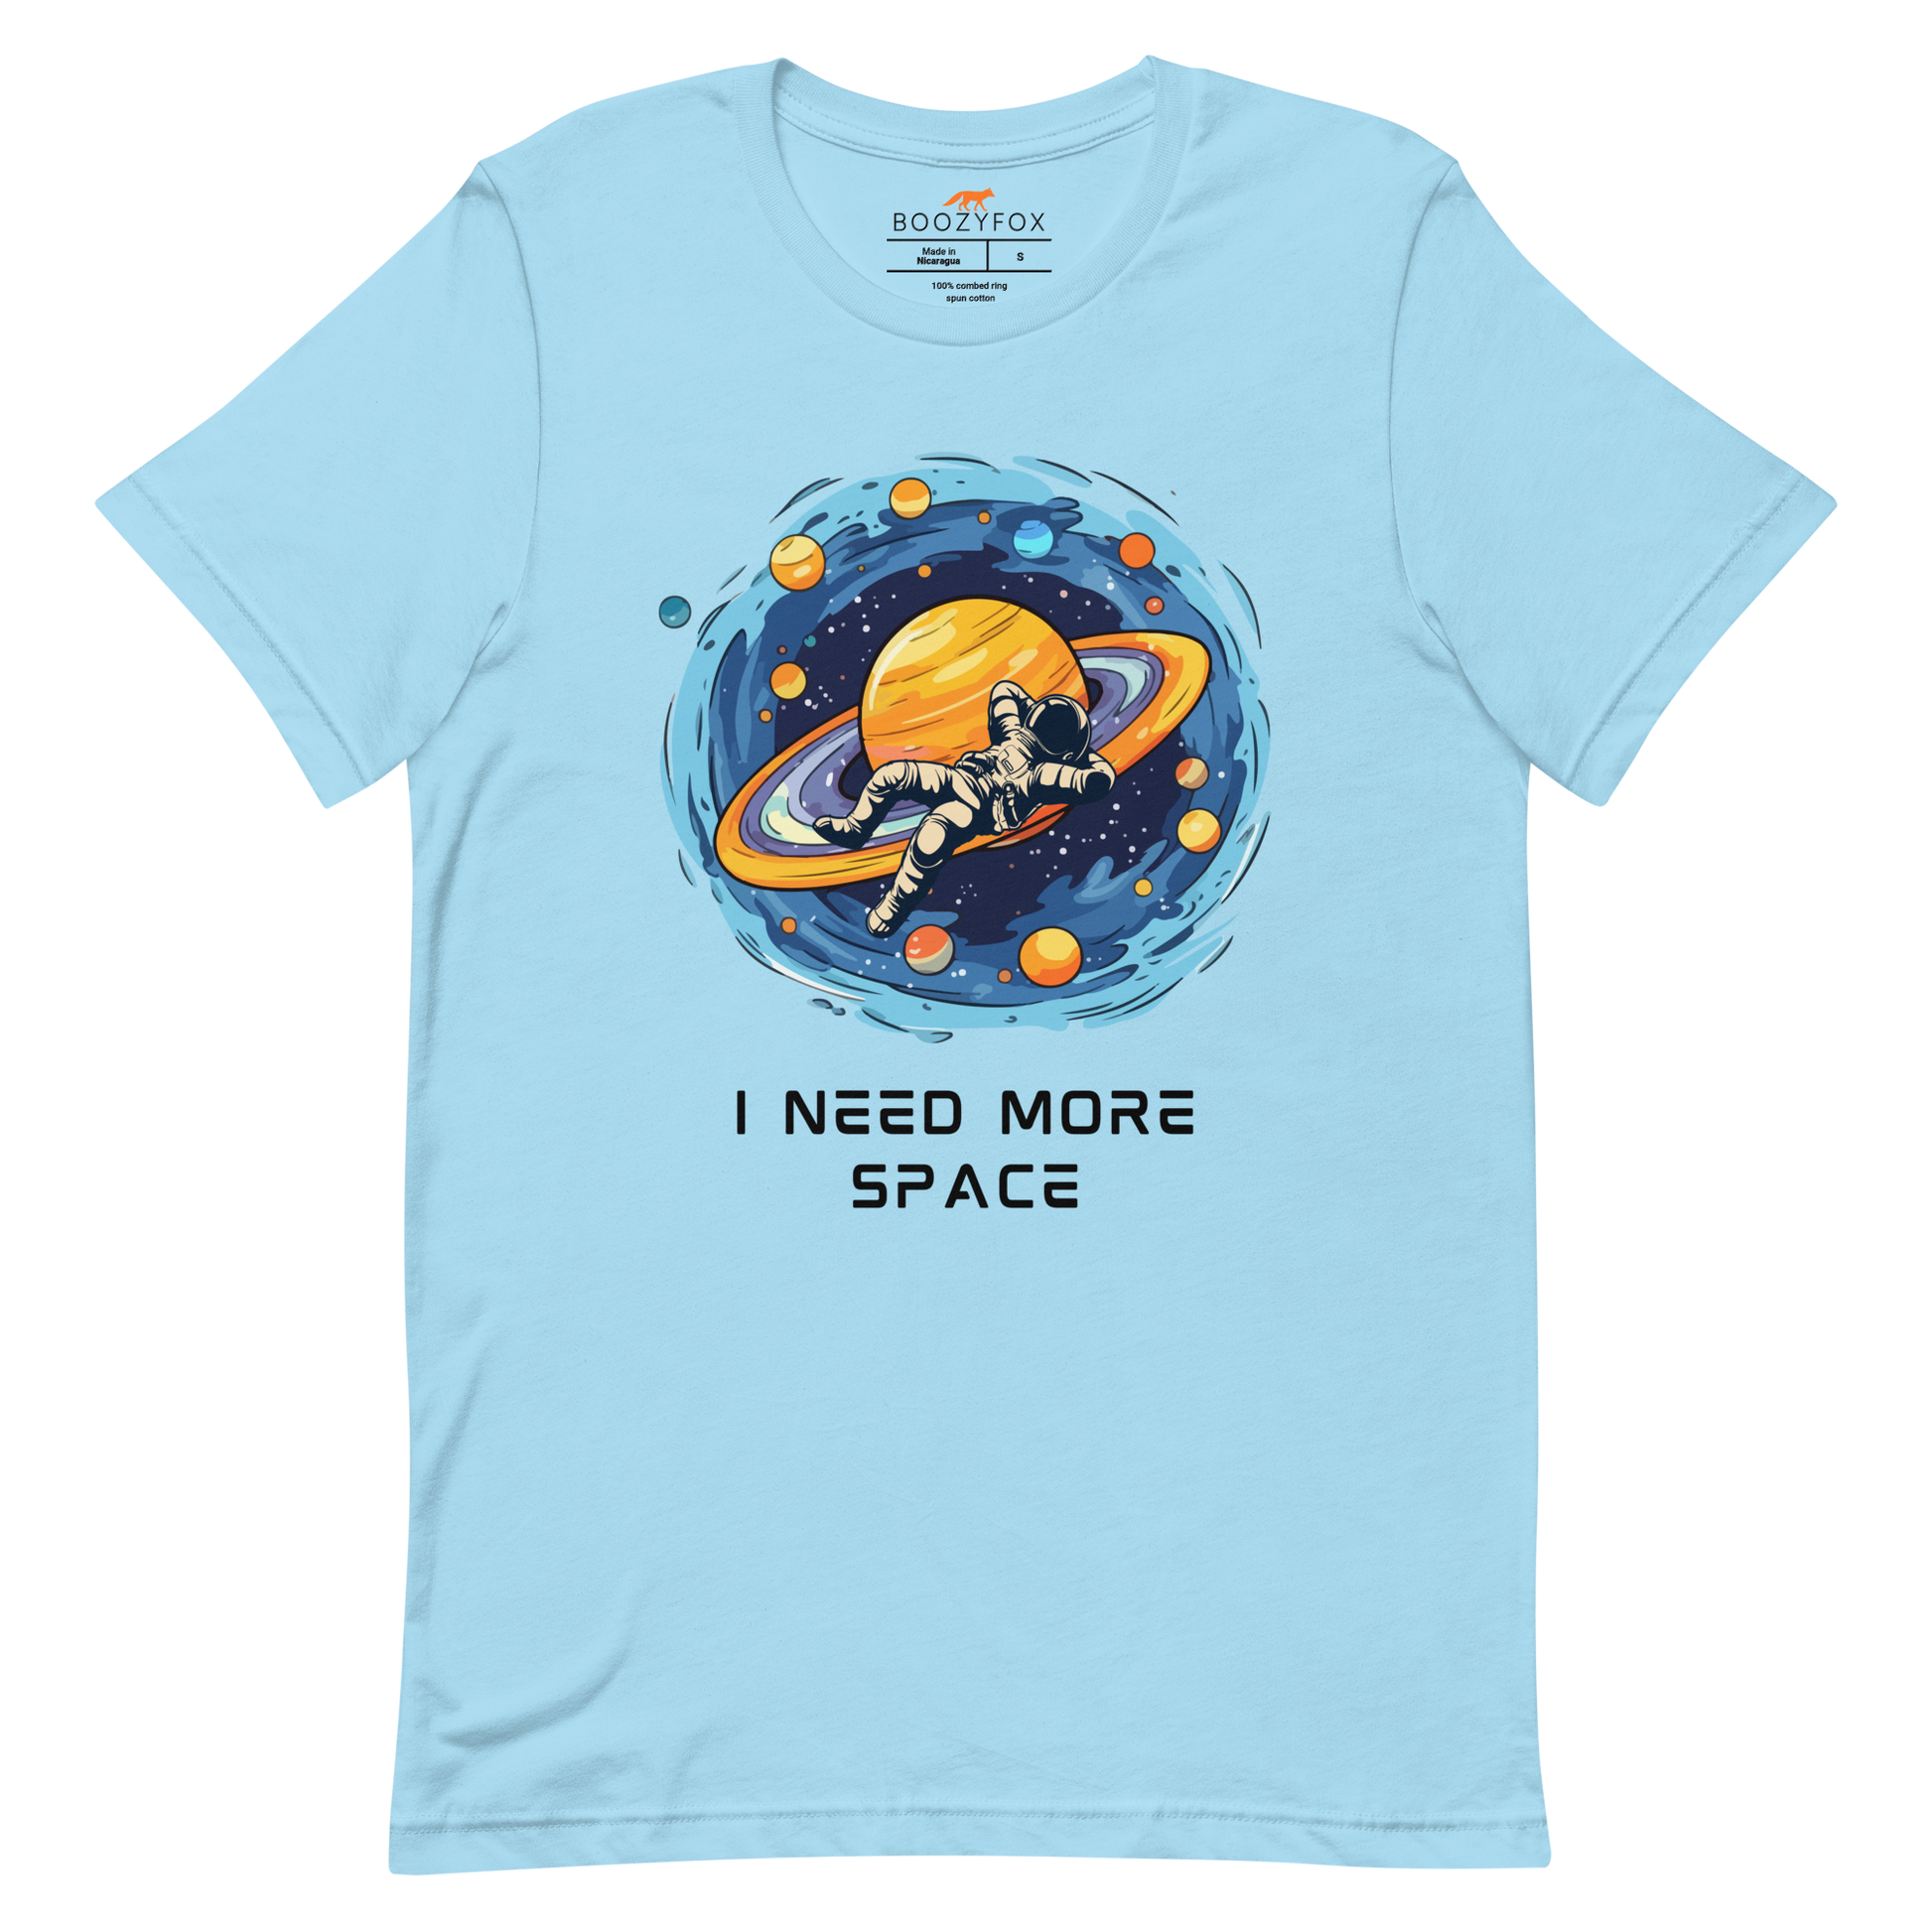 Ocean Blue Premium Astronaut Tee featuring a captivating I Need More Space graphic on the chest - Funny Graphic Space Tees - Boozy Fox